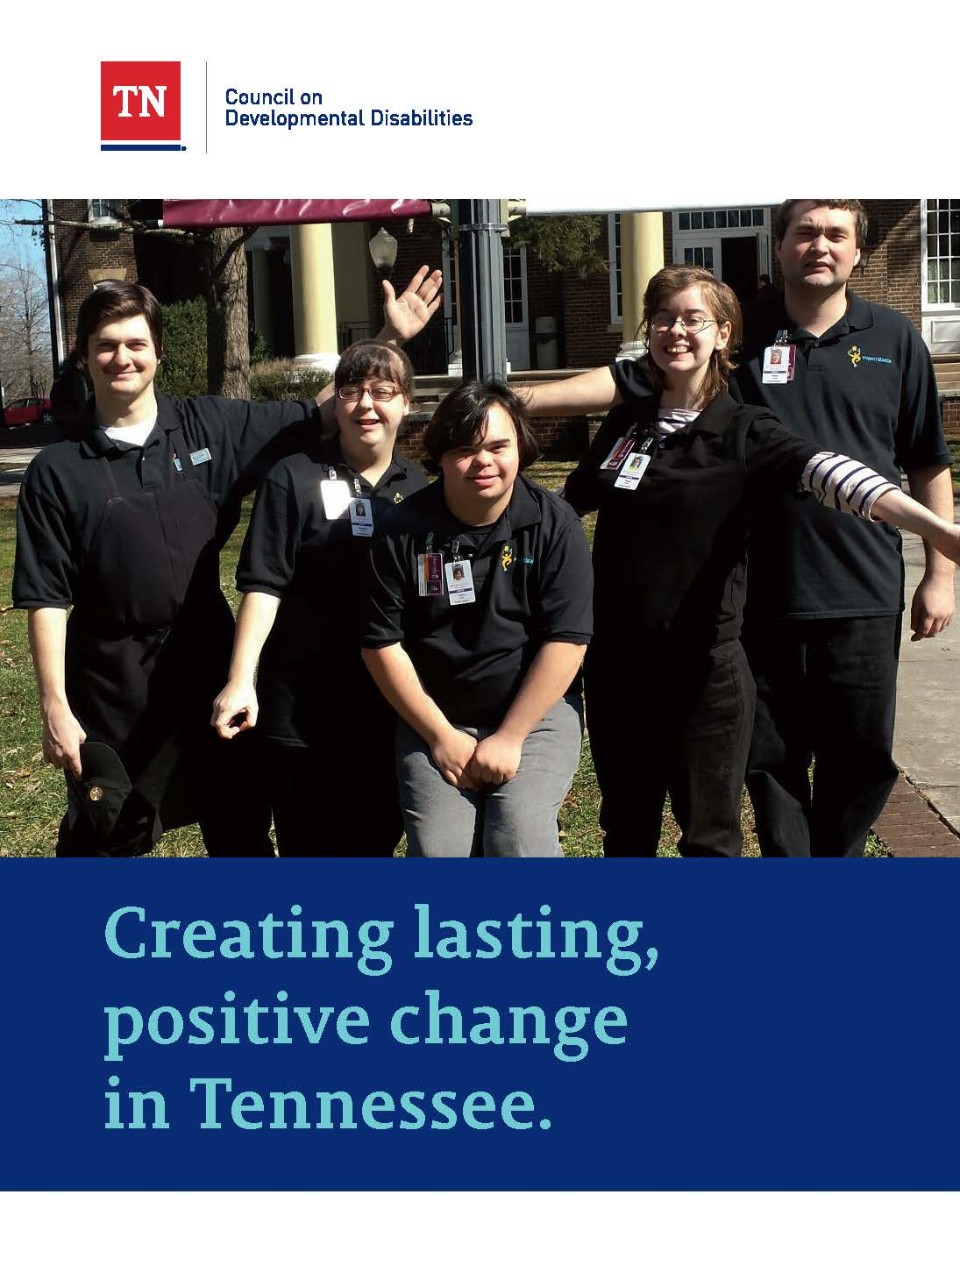 Cover of a Council report that shows a group of 5 young adults with disabilities outside wearing matching black polo shirts - text says "creating lasting positive change in TN"